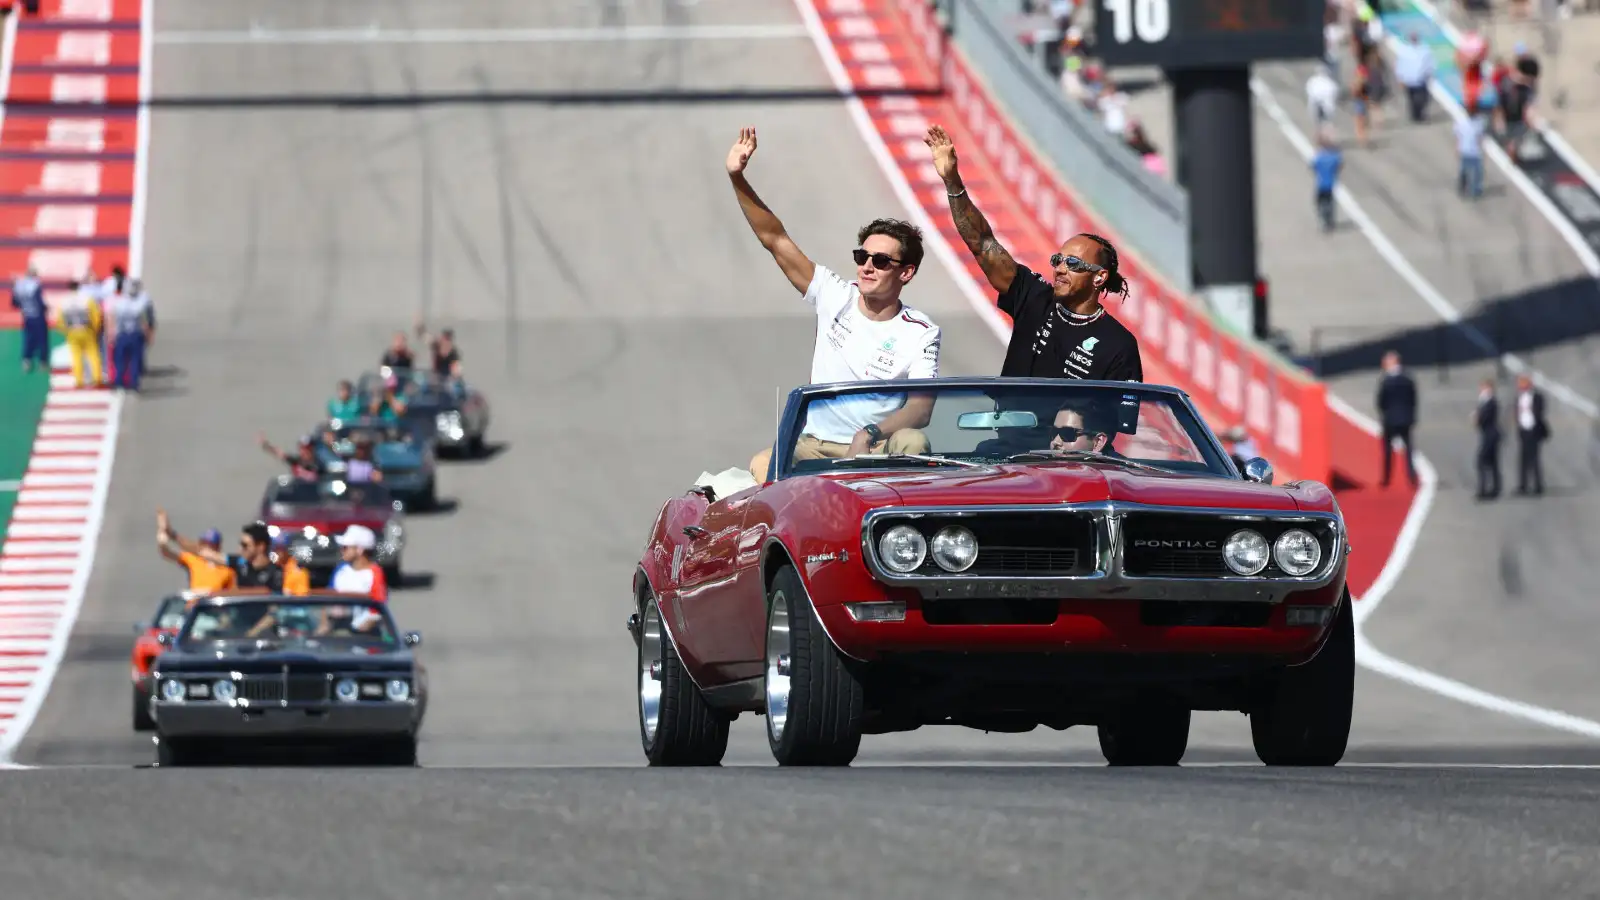 The vintage car drivers' parade at the United States Grand Prix, with Mercedes drivers George Russell and Lewis Hamilton.